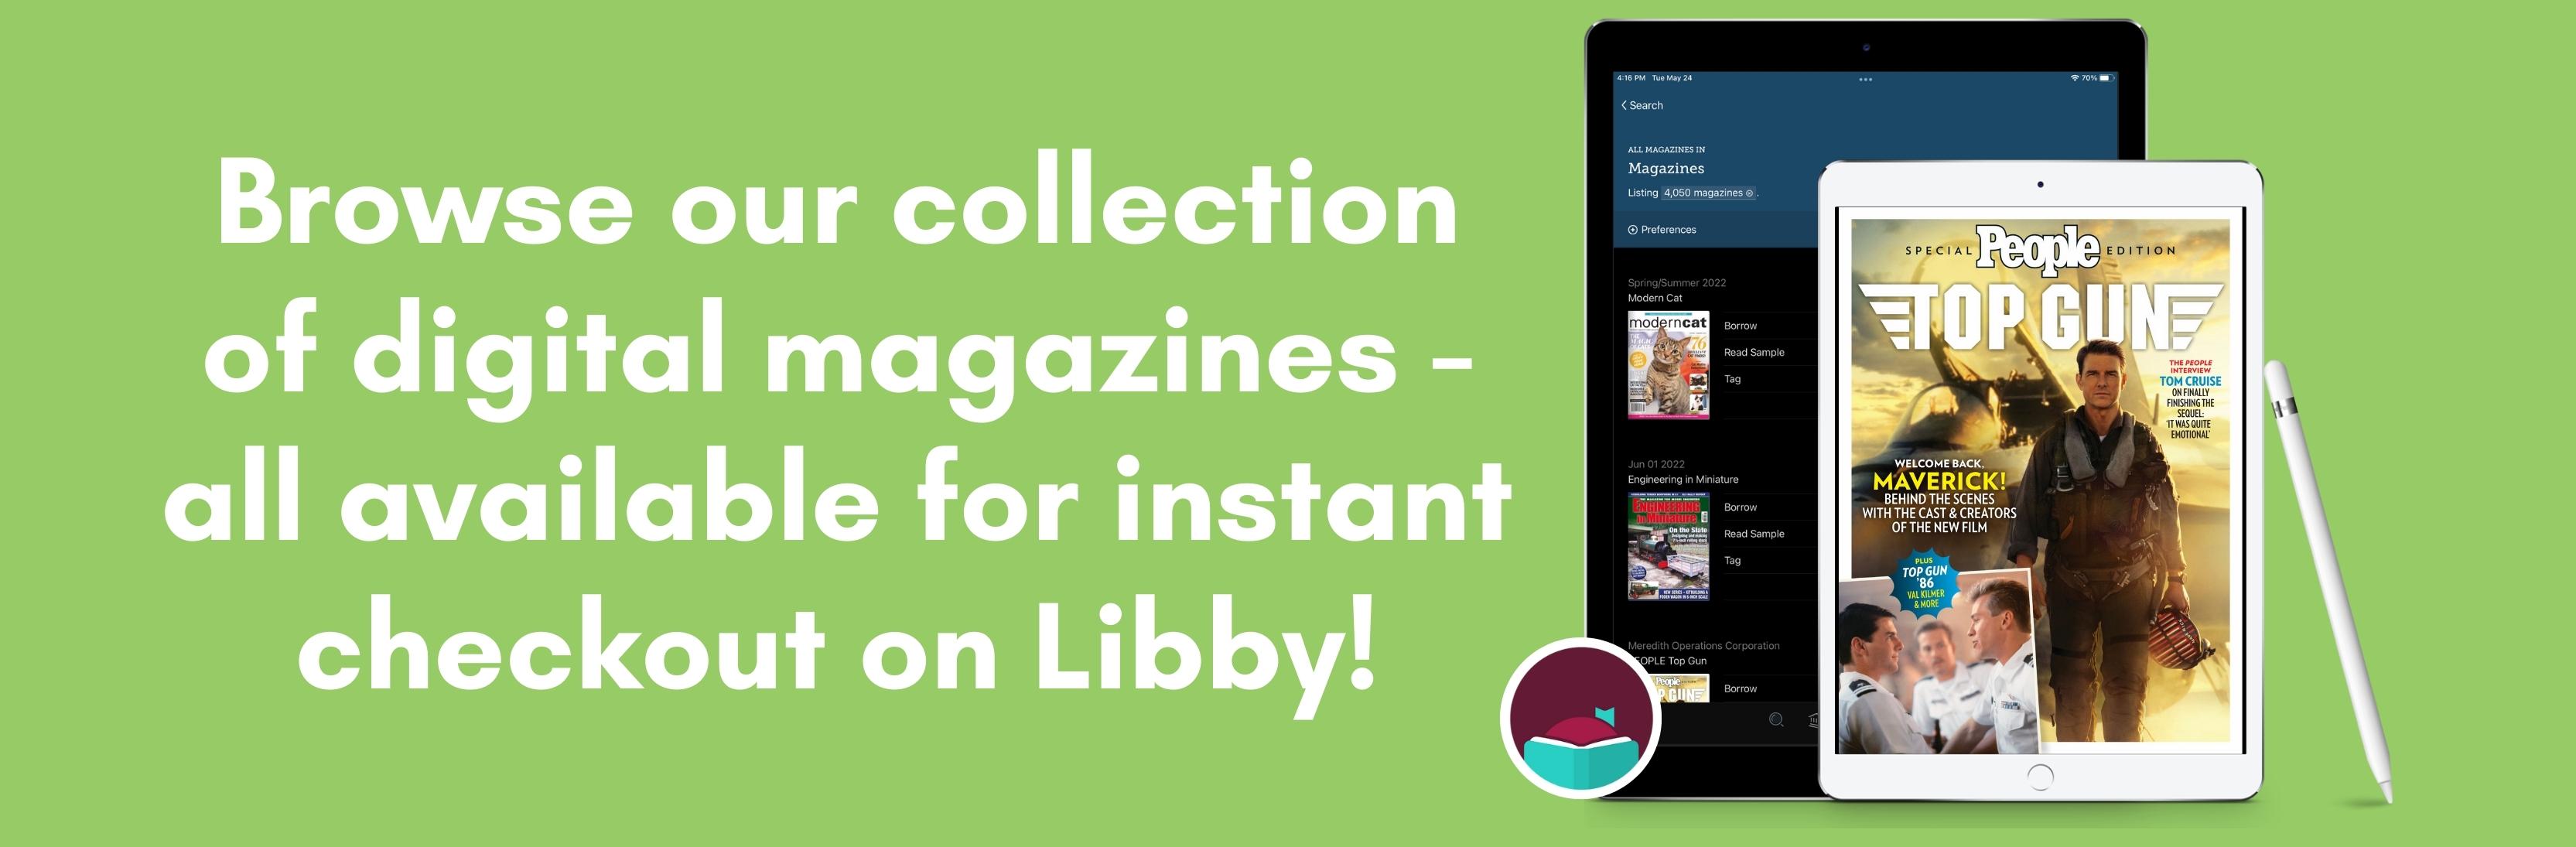 Image for "Magazines on Libby"